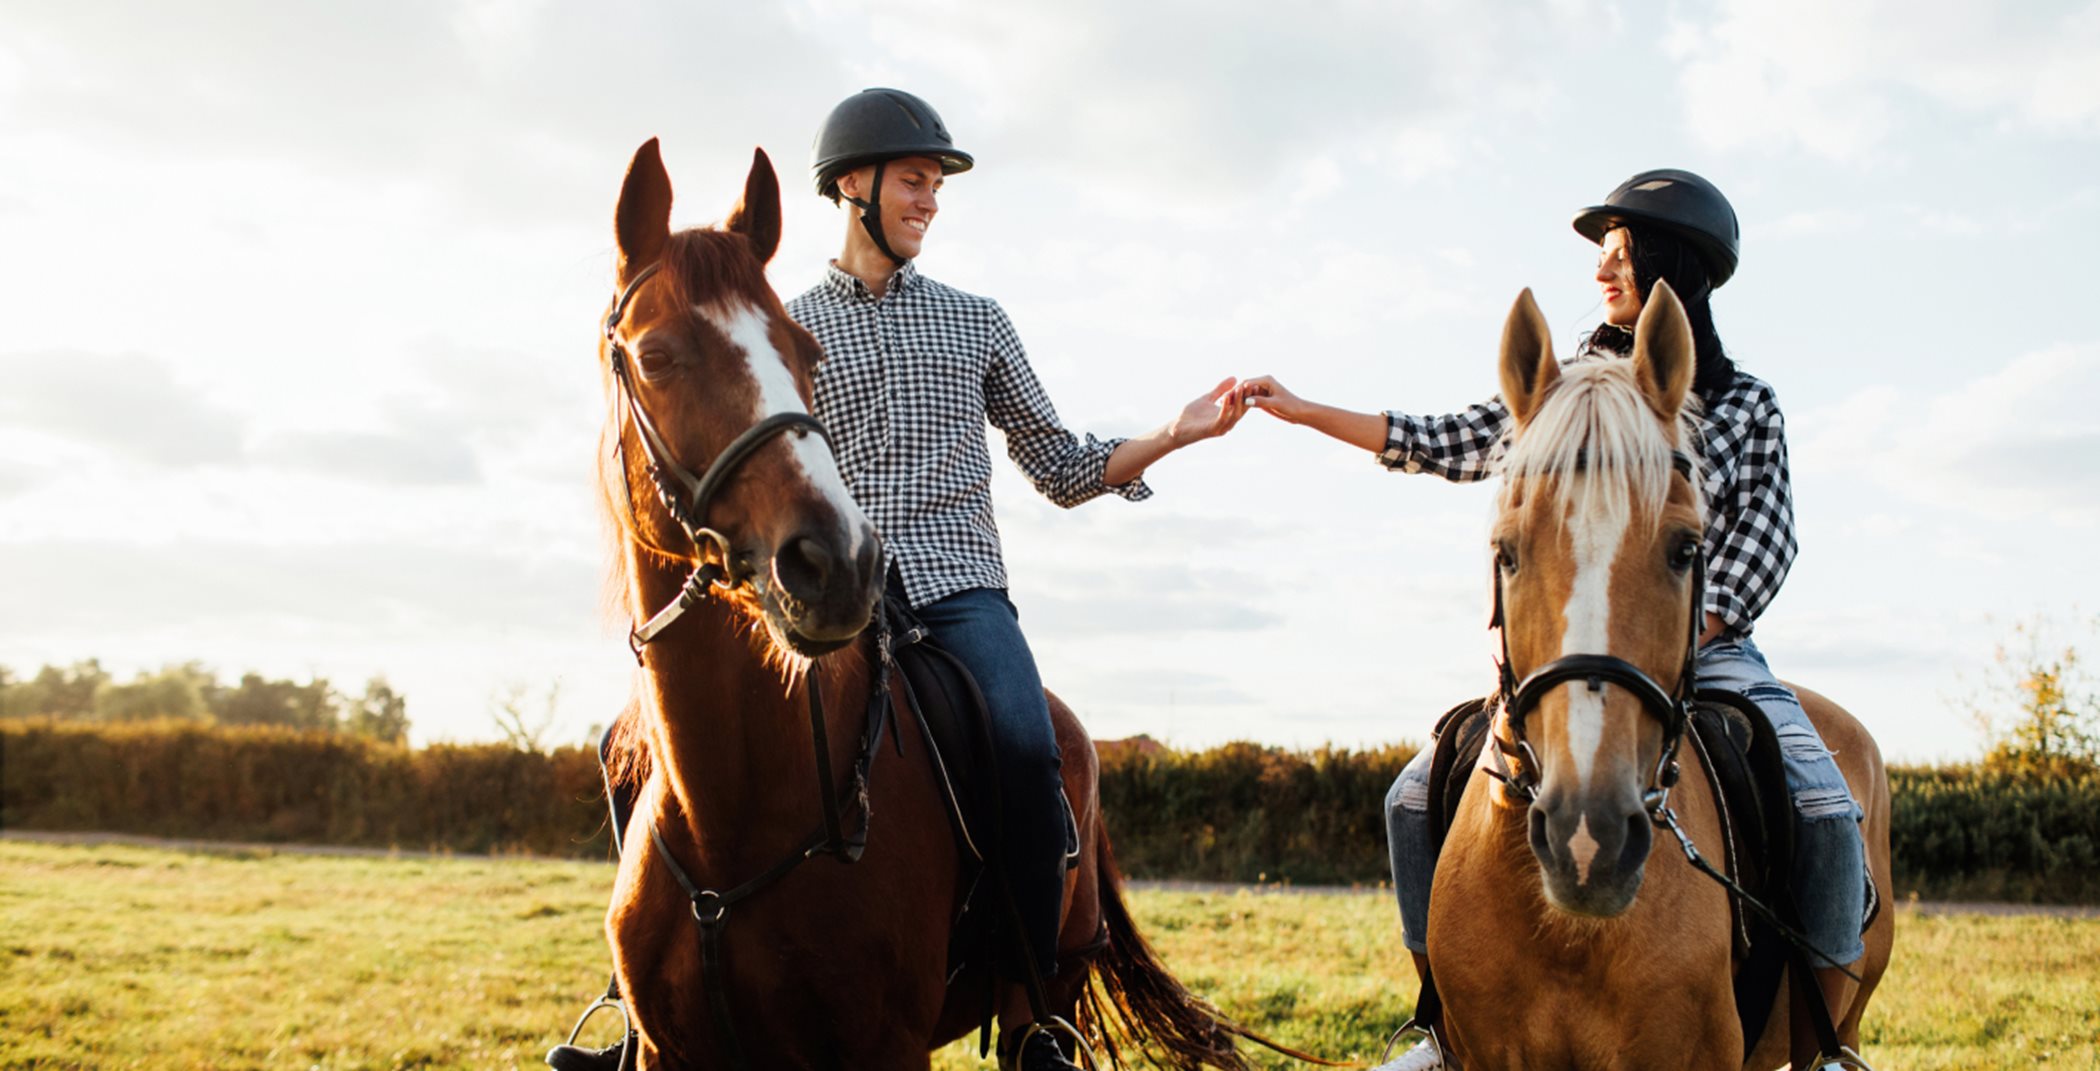 Two people holding hands while riding horses